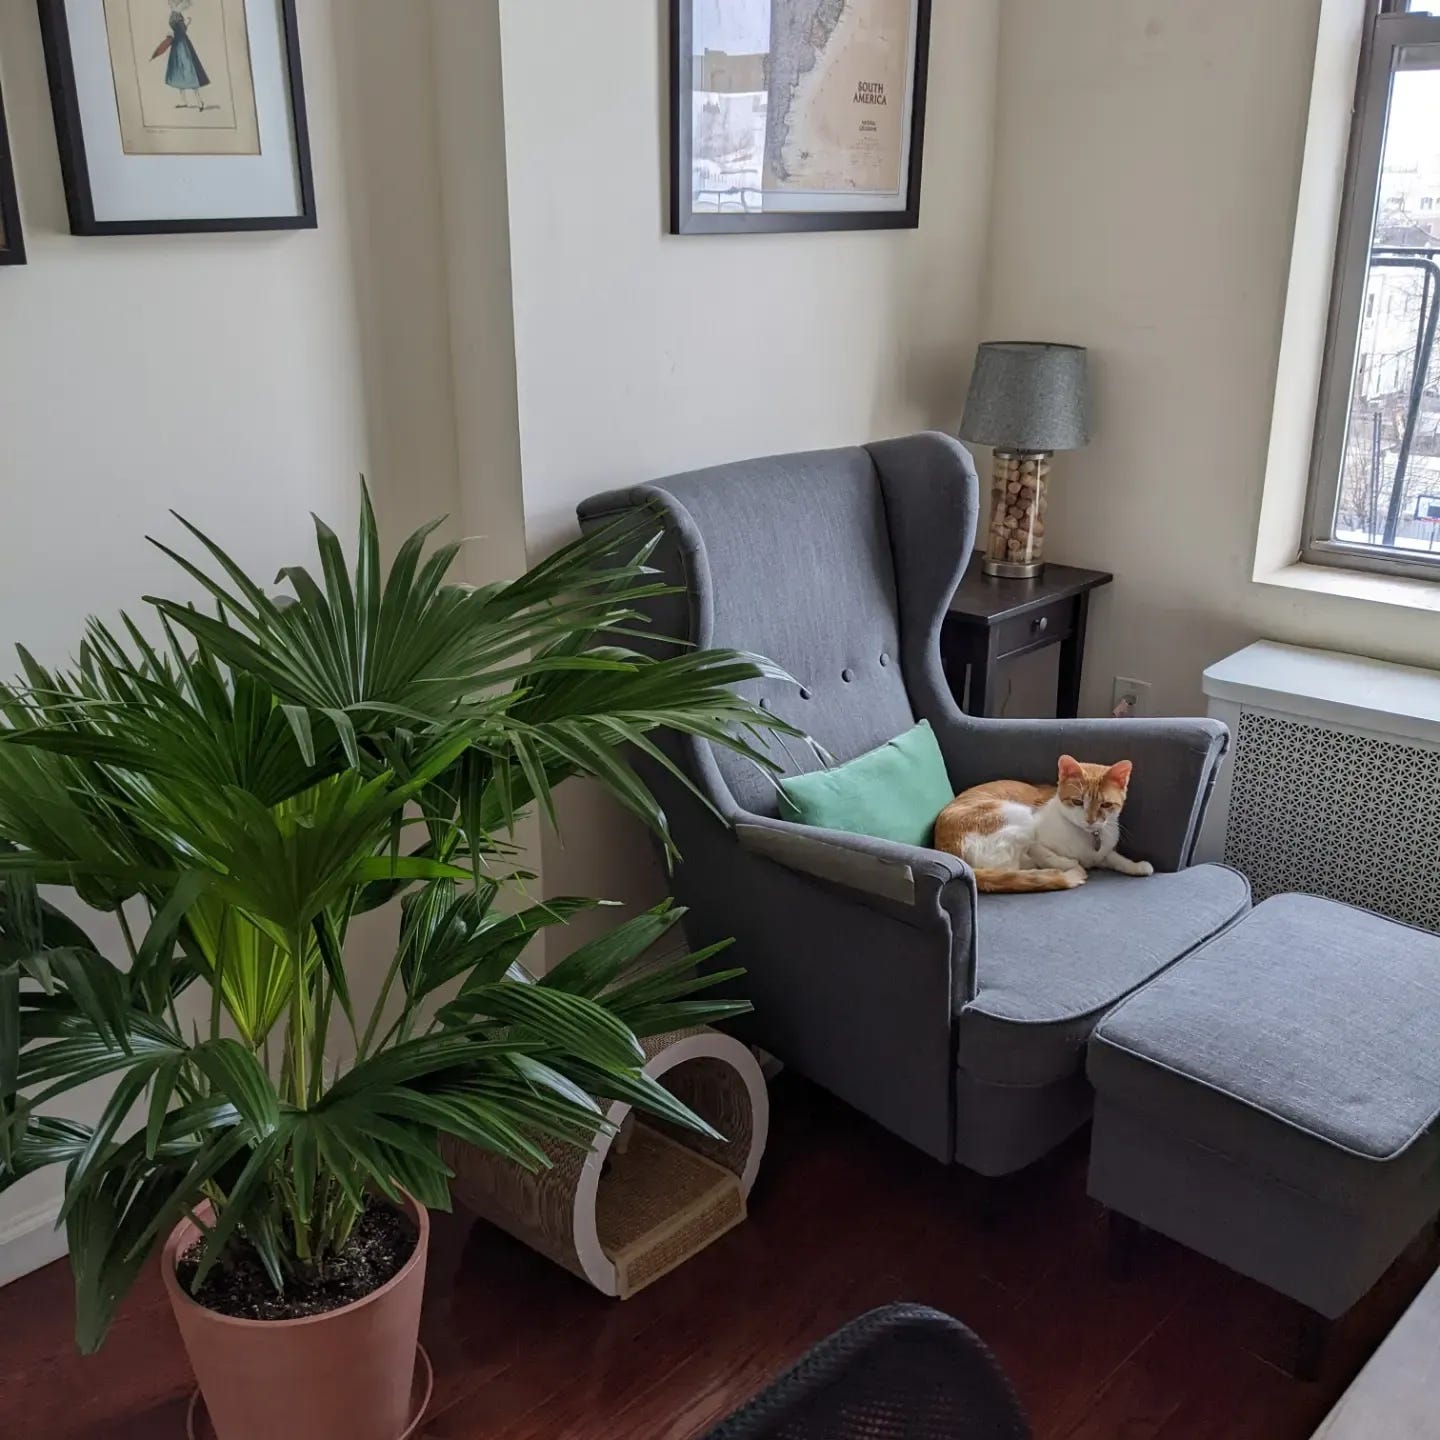 A Chinese palm plant next to a grey upholstered chair where a cat sits